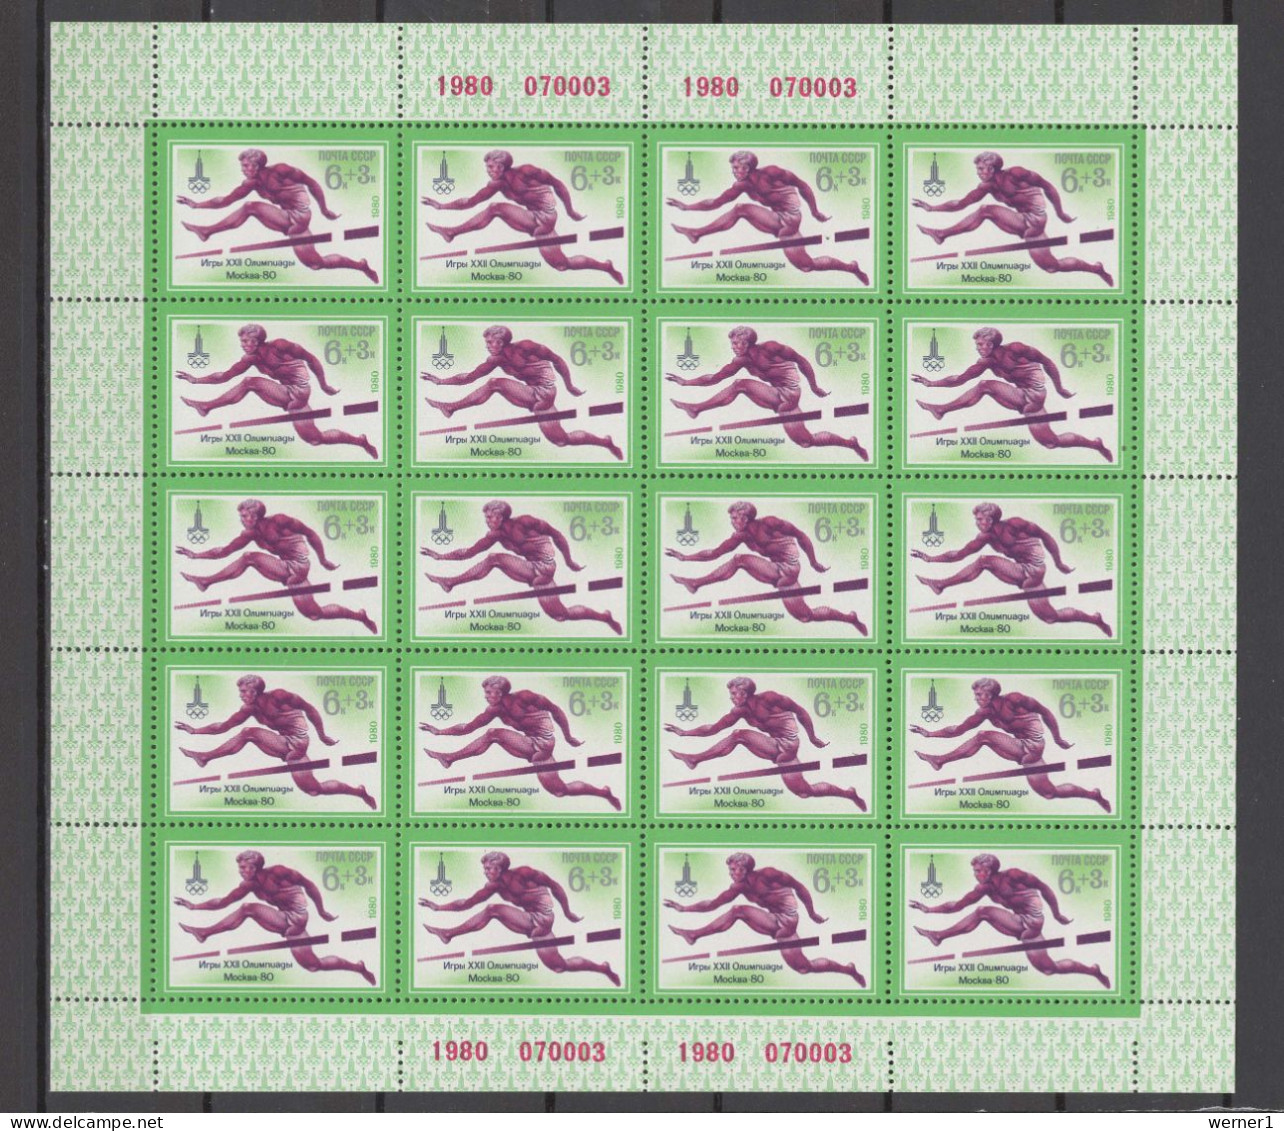 USSR Russia 1980 Olympic Games Moscow, Athletics Set Of 5 Sheetlets MNH - Ete 1980: Moscou